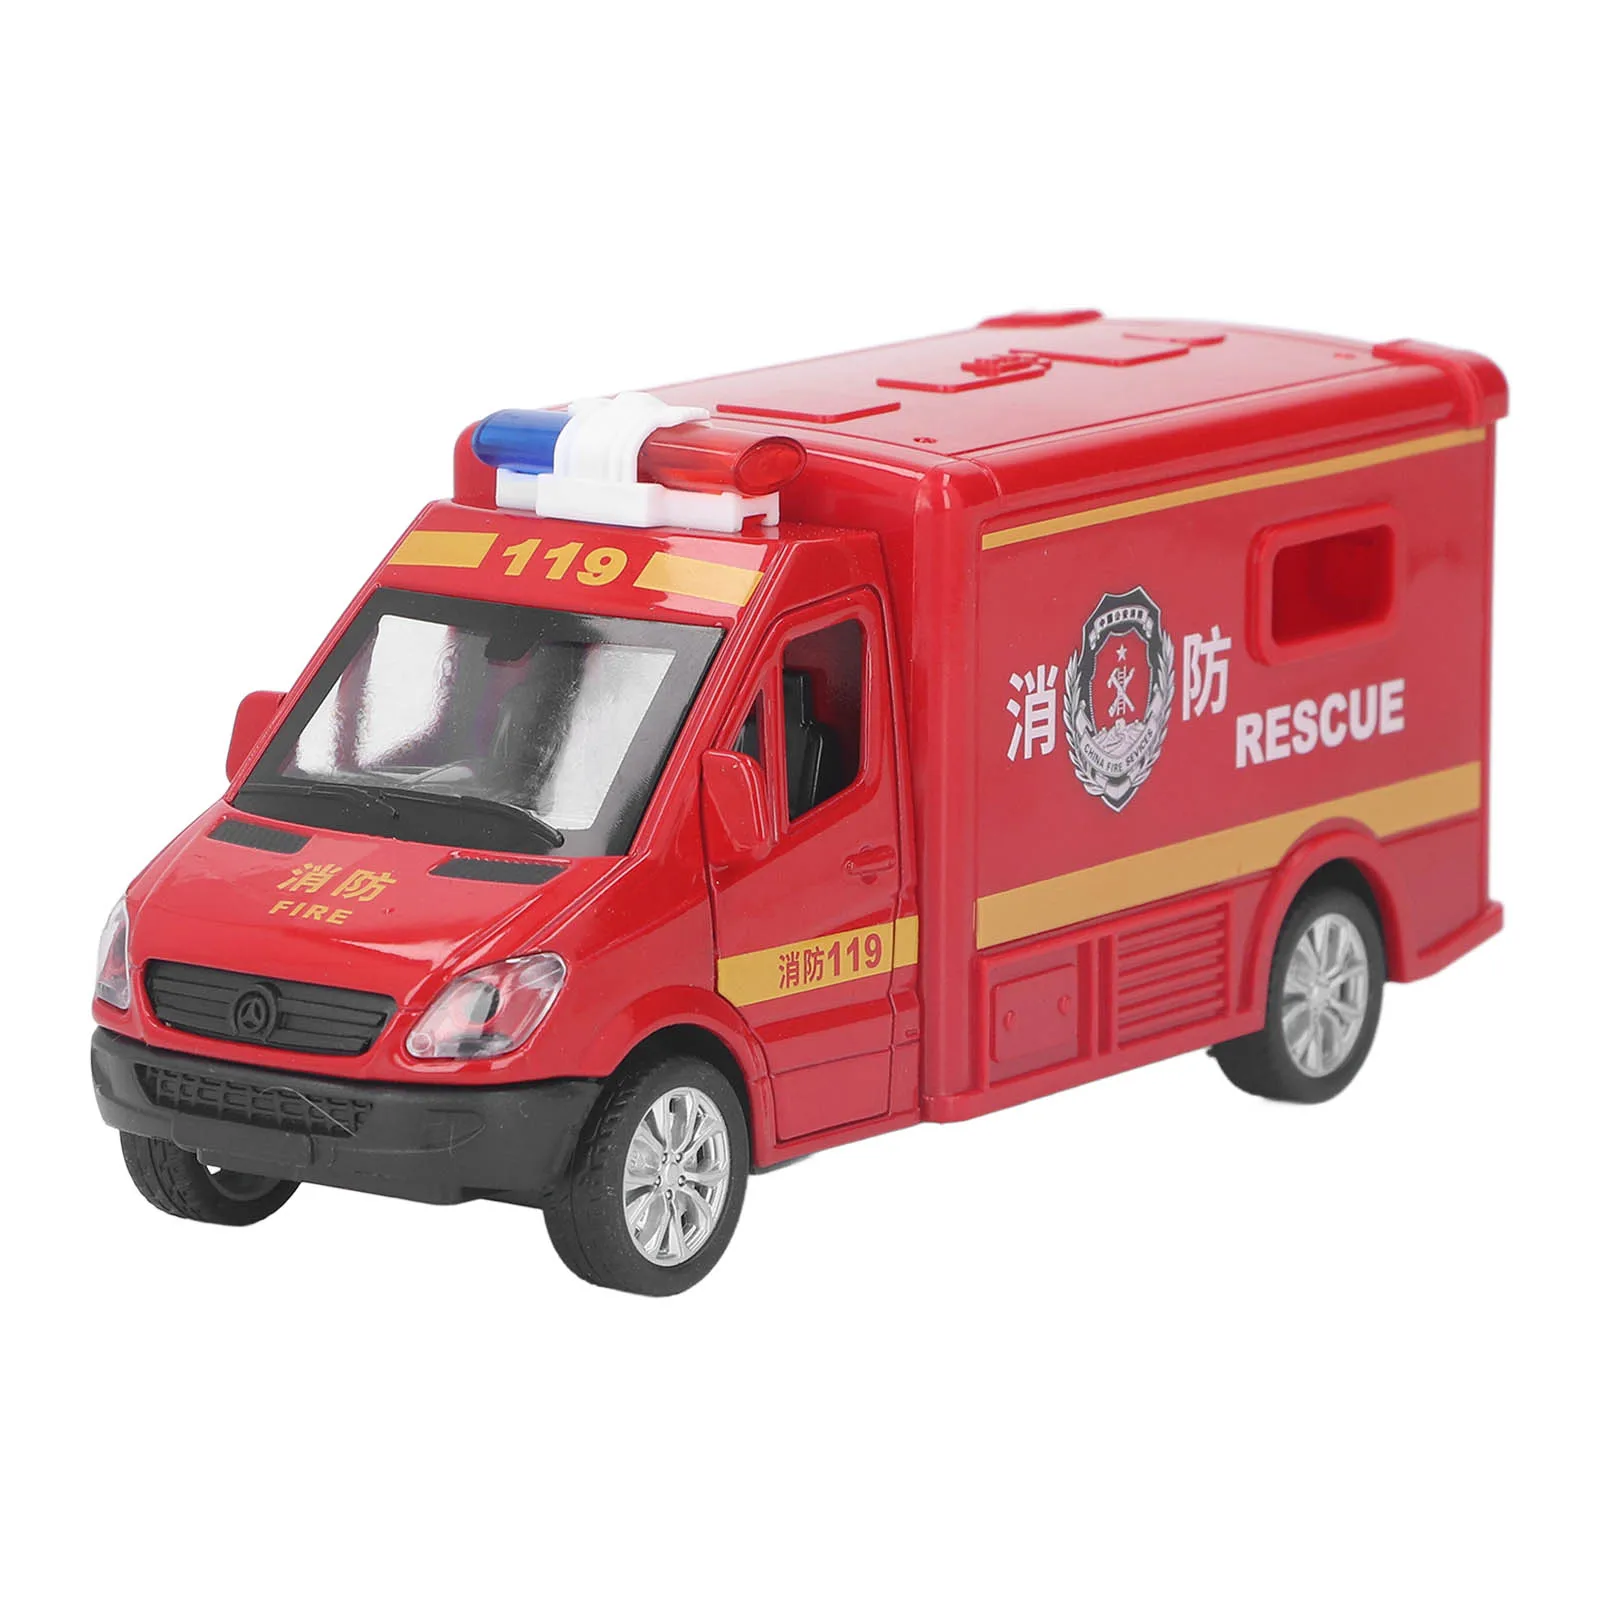 Fire Truck Alloy Simulation Car Model Innovative Sound and Lights Fire Truck Pull Back Fire Truck Toy for Kids Gifts Collection